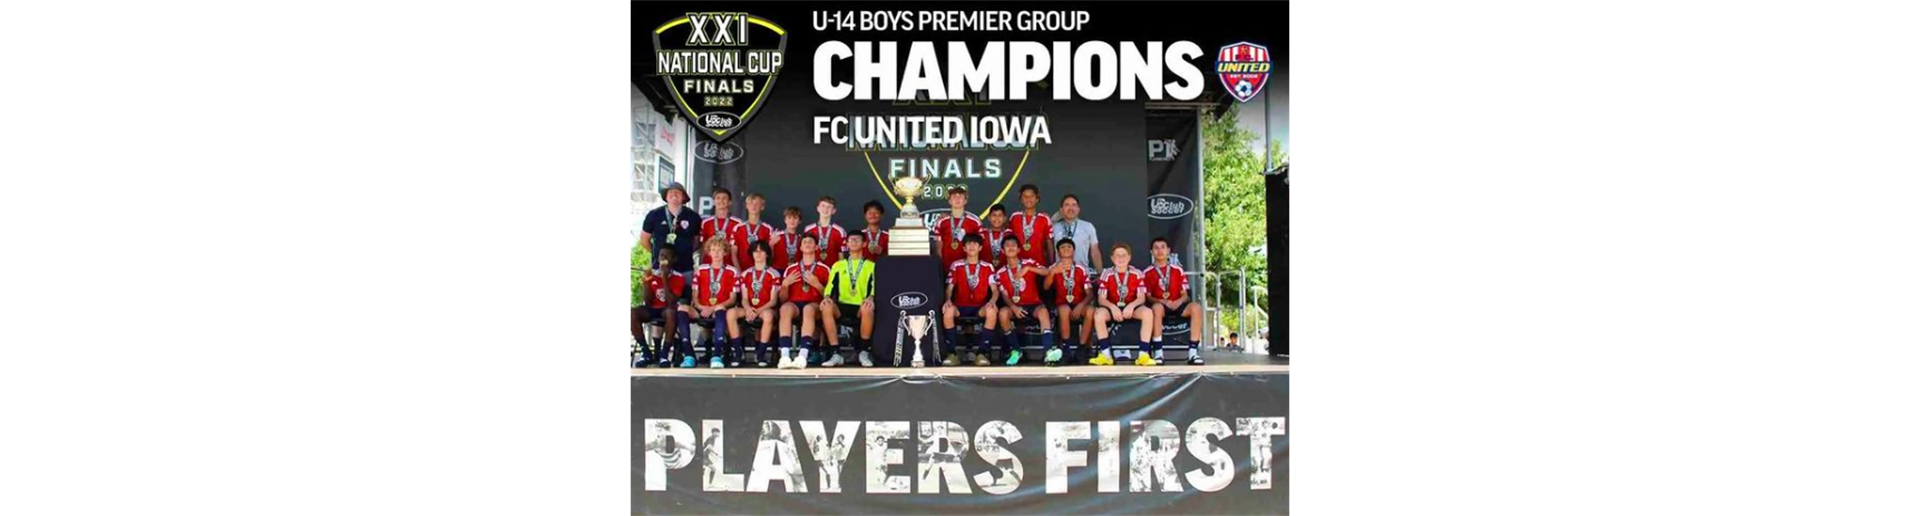 2008 Boys crowned National Champions!!